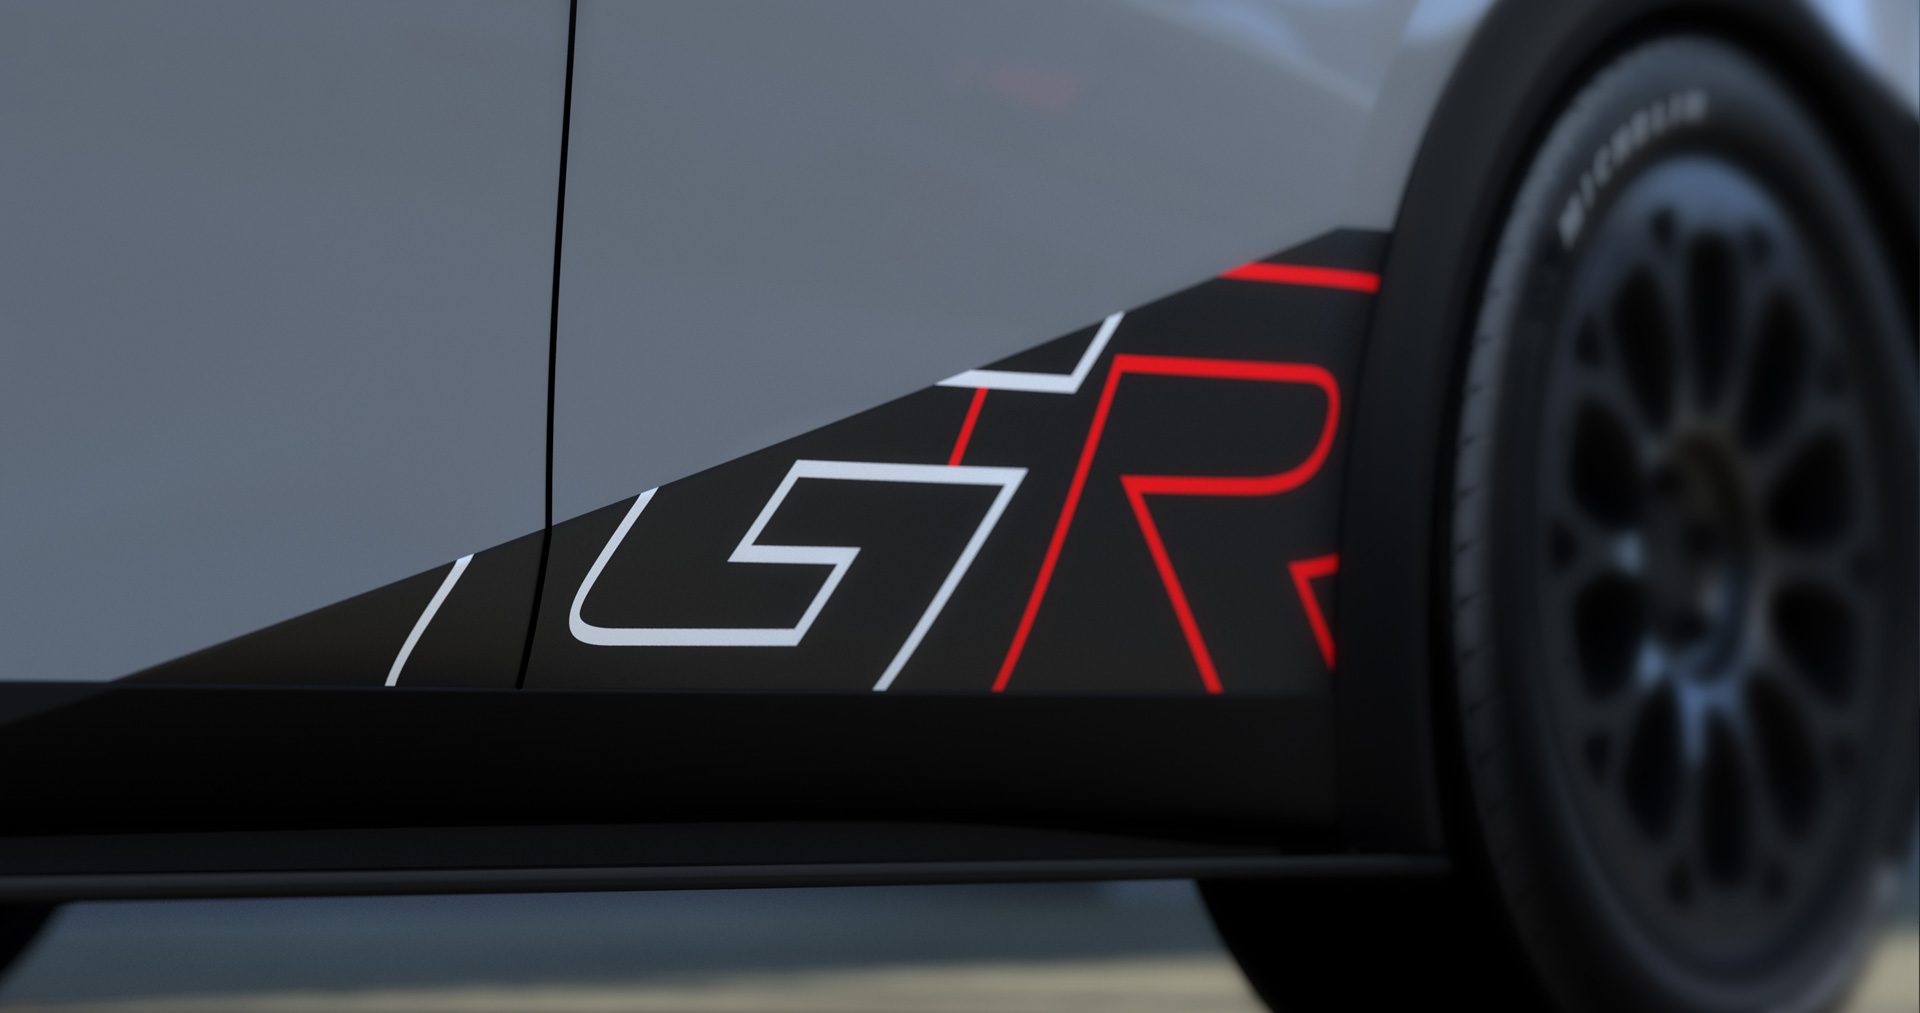 Toyota Gazoo Racing stickers on the side of the Toyota Prius GR 24 H Le Mans concept